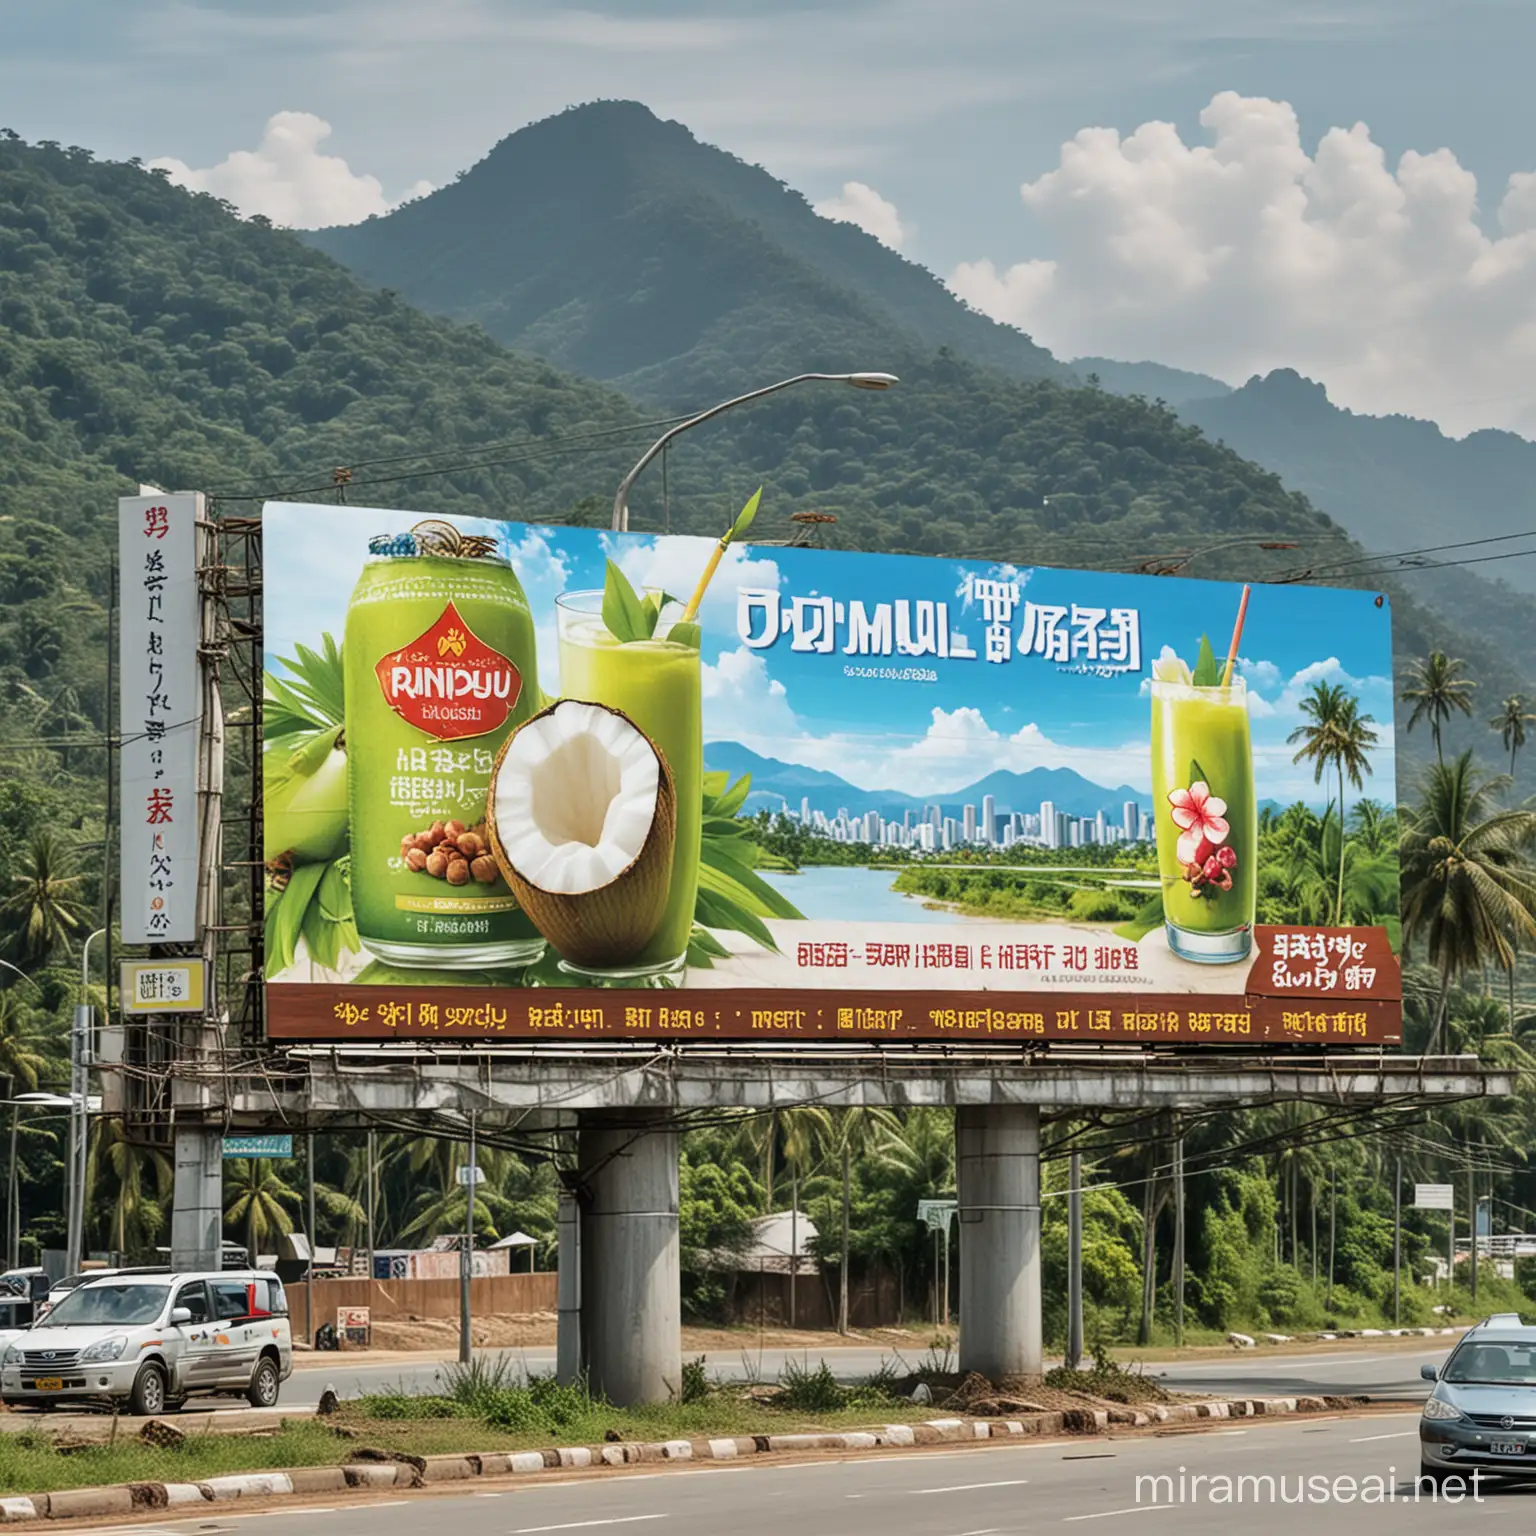 A large billboard advertising 'BANYU DEGAN' is displayed above the city highway.  The advertisement displays a picture of a refreshing young coconut drink in glasses and bottles, with a view of the sub-district city as the background.